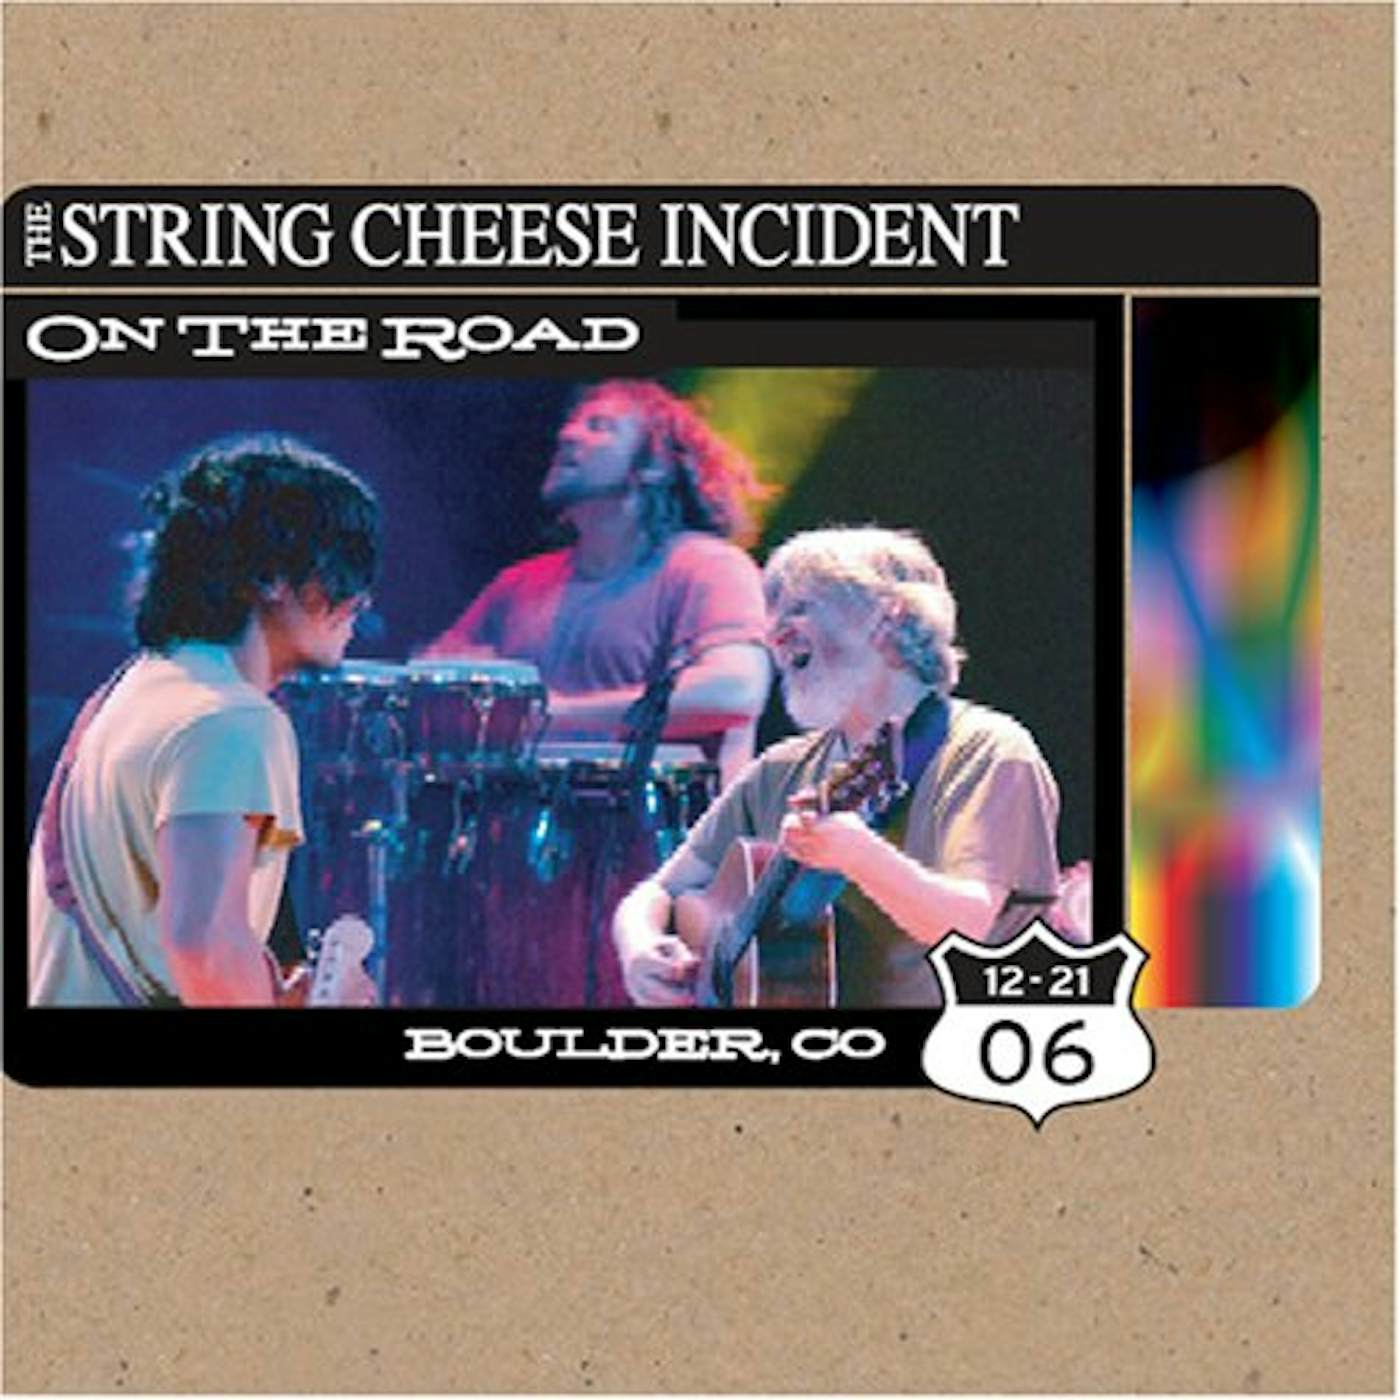 The String Cheese Incident ON THE ROAD: BOULDER CO 12-21-06 CD